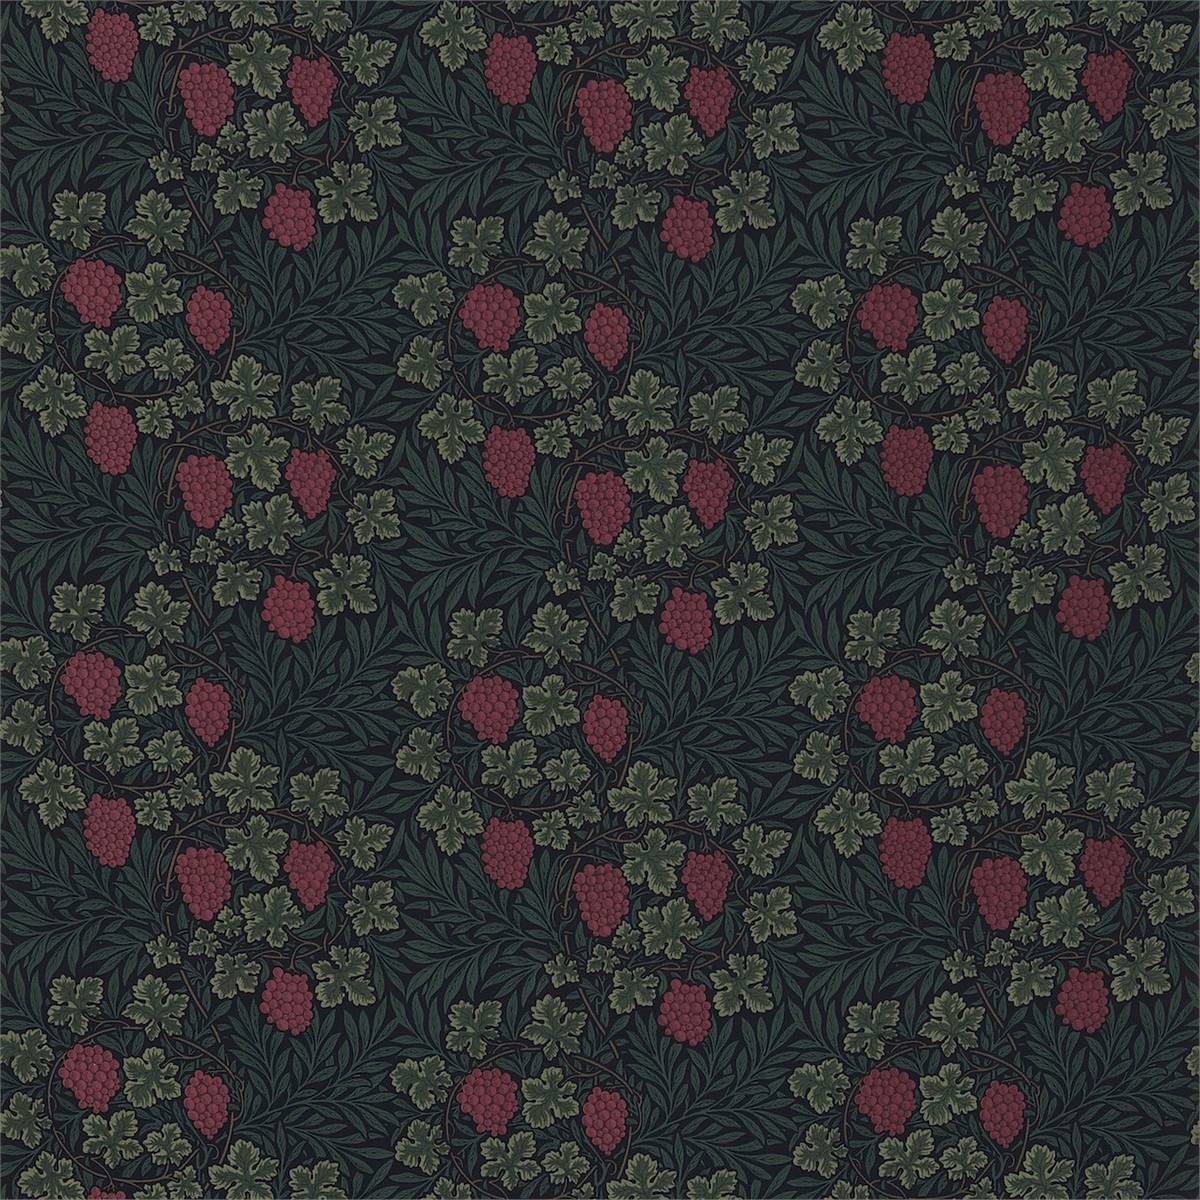 Vine Dark Green/Red Fabric by William Morris & Co.